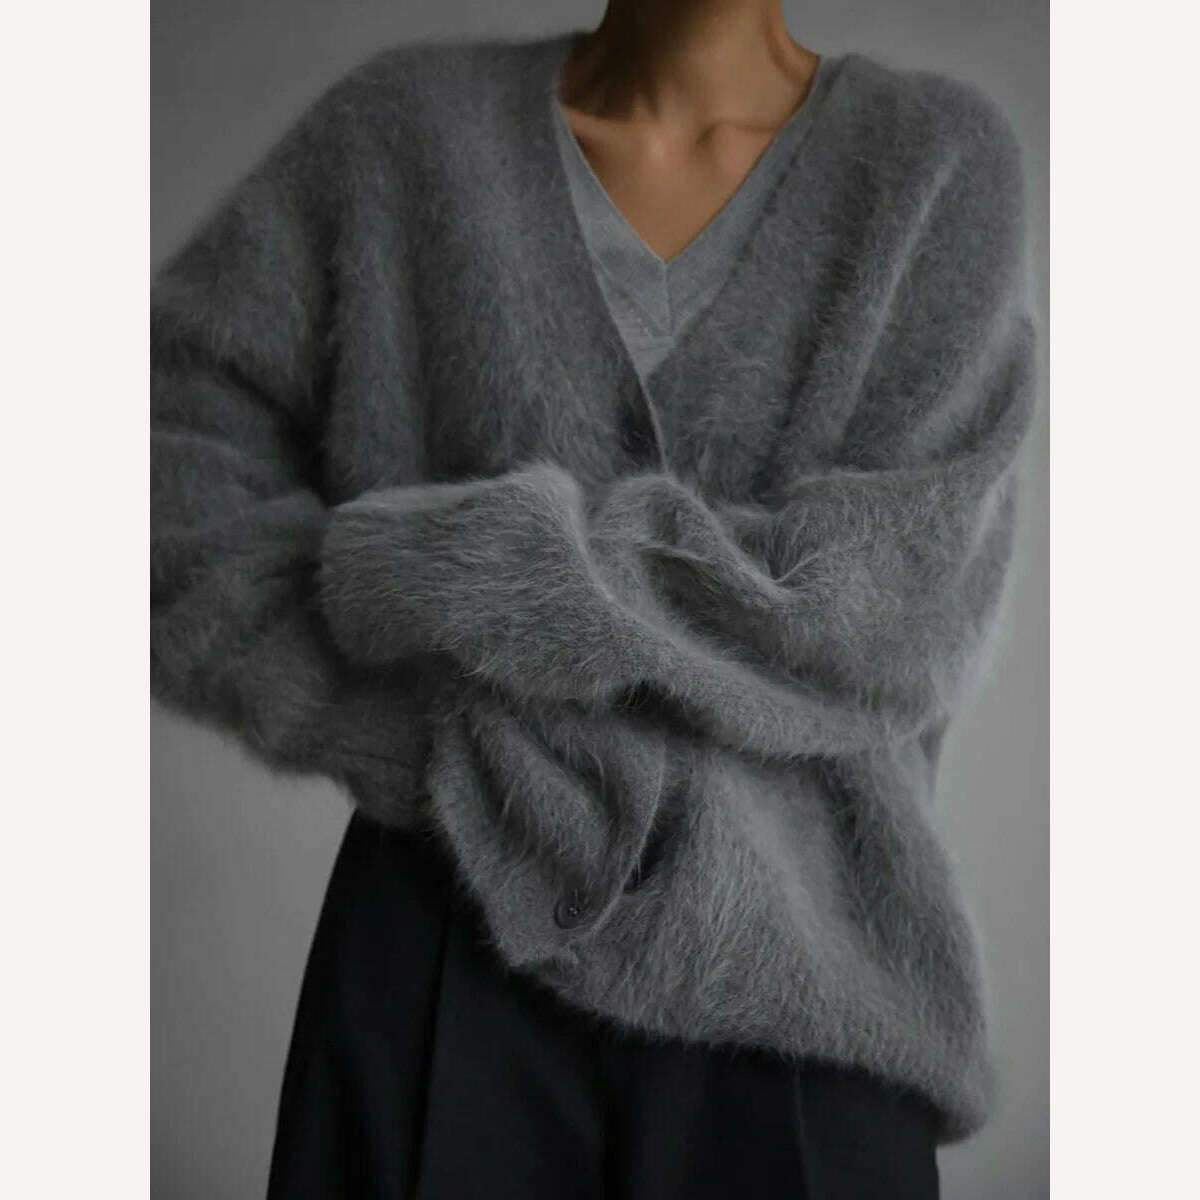 KIMLUD, Fluffy Mohair Cardigan For Women V-Neck Button Up Oversize Cardigan Sweater Autumn Winter Warm Knitted Outerwear, KIMLUD Women's Clothes